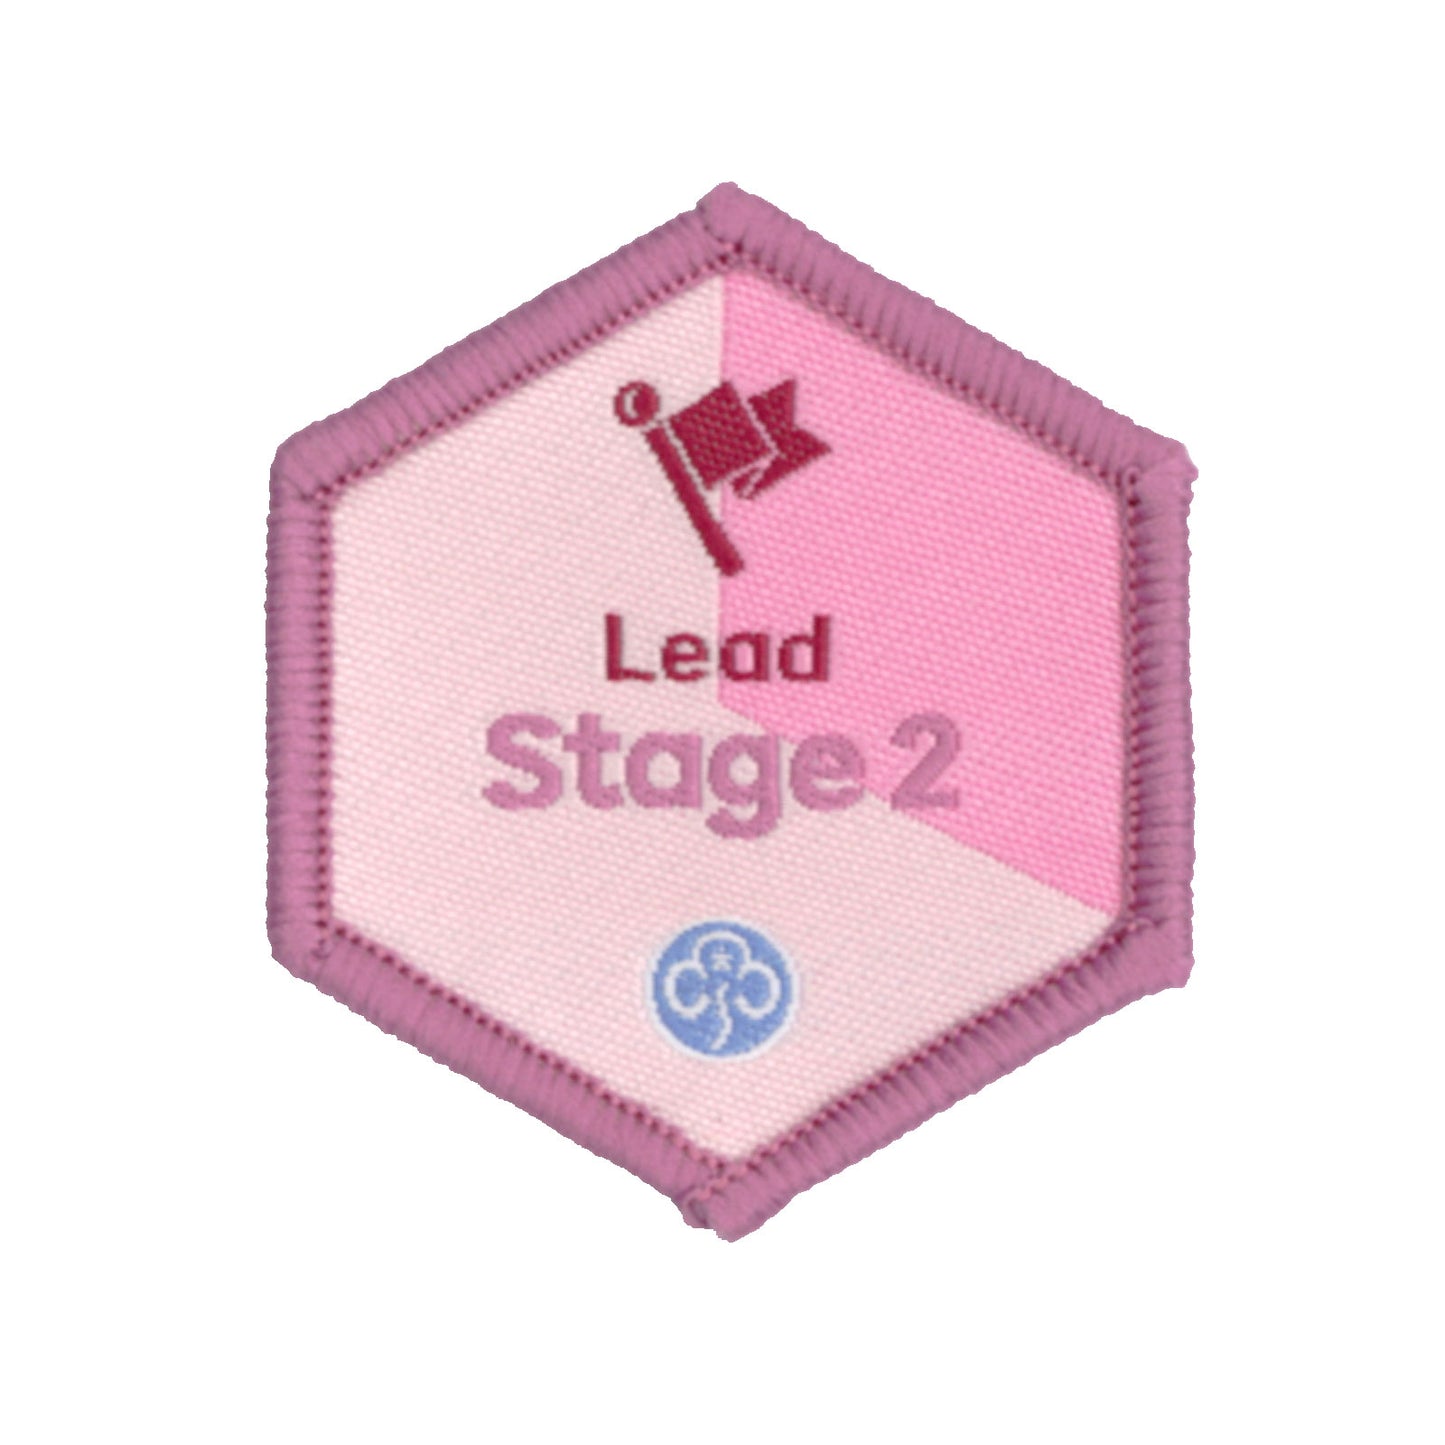 Skills Builder - Skills For My Future - Lead Stage 2 Woven Badge